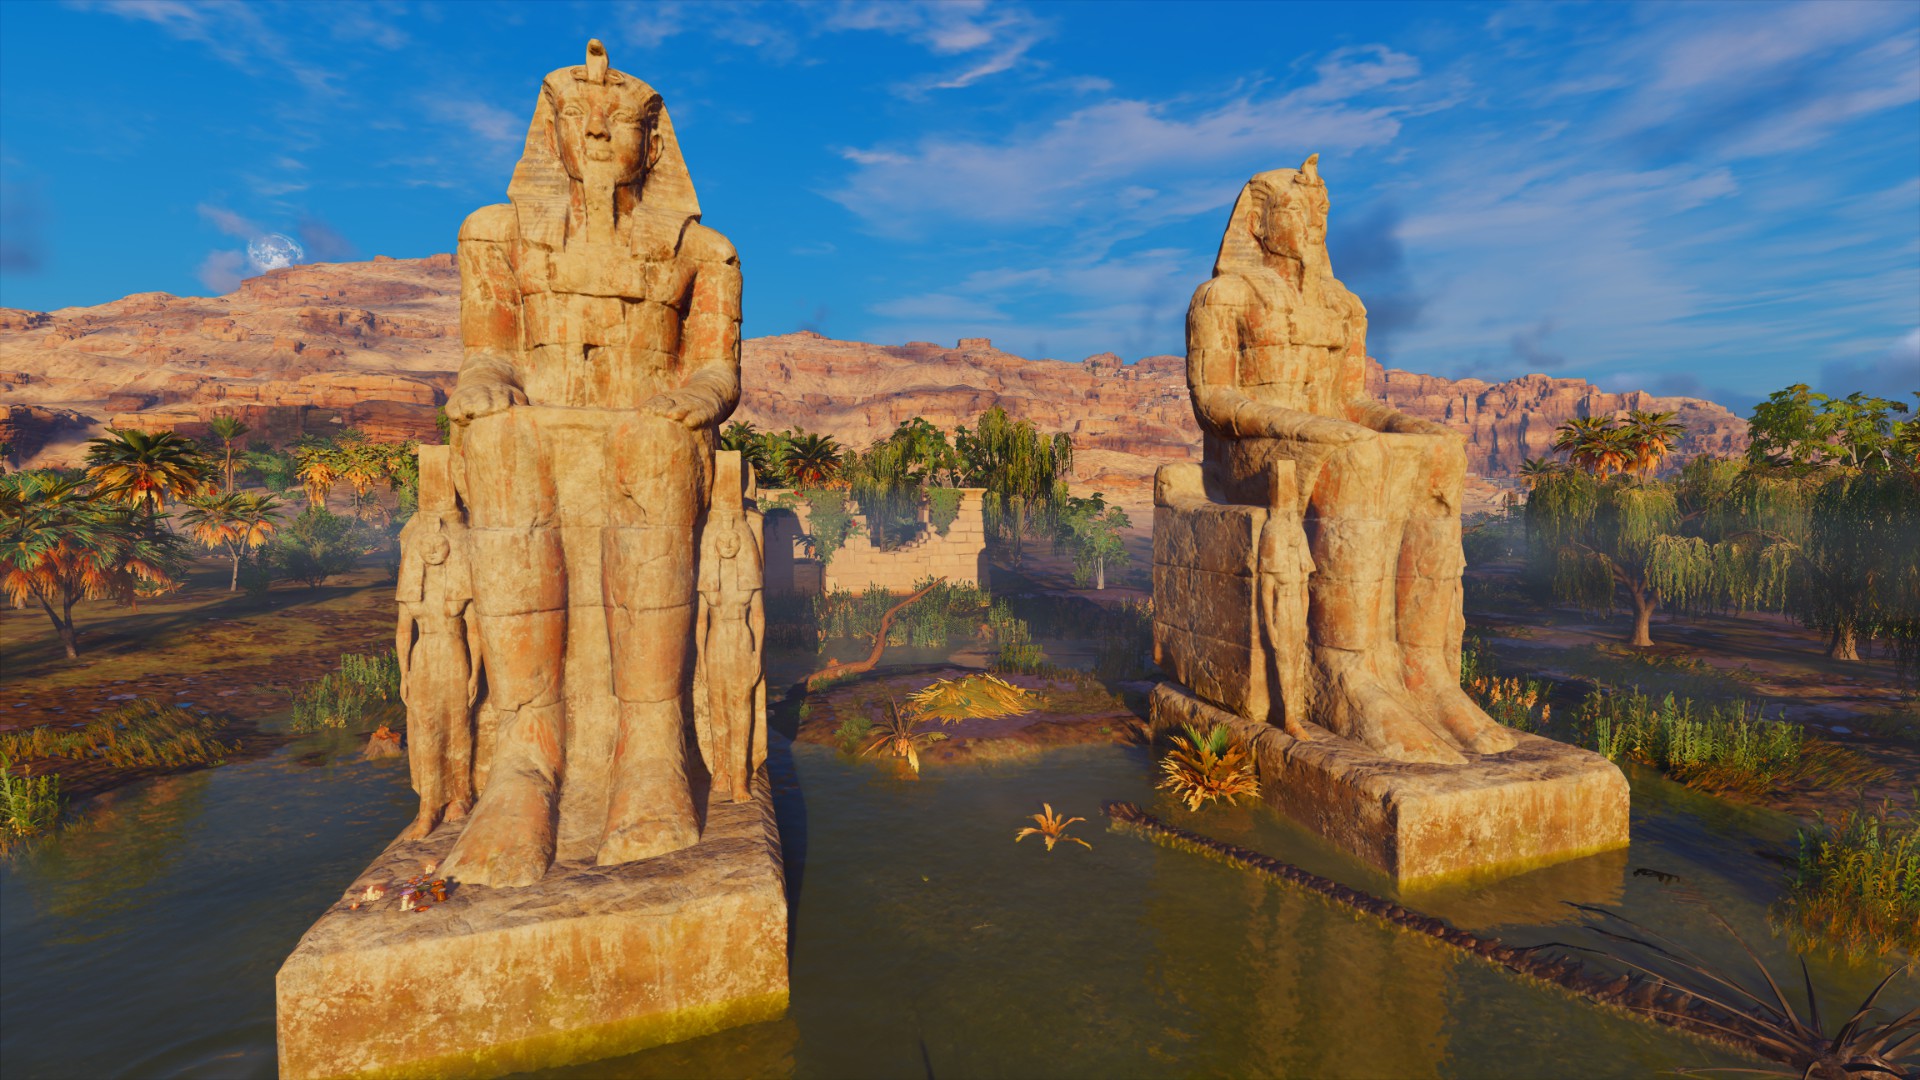 Colossi of Memnon - The Singing Statues of Egypt